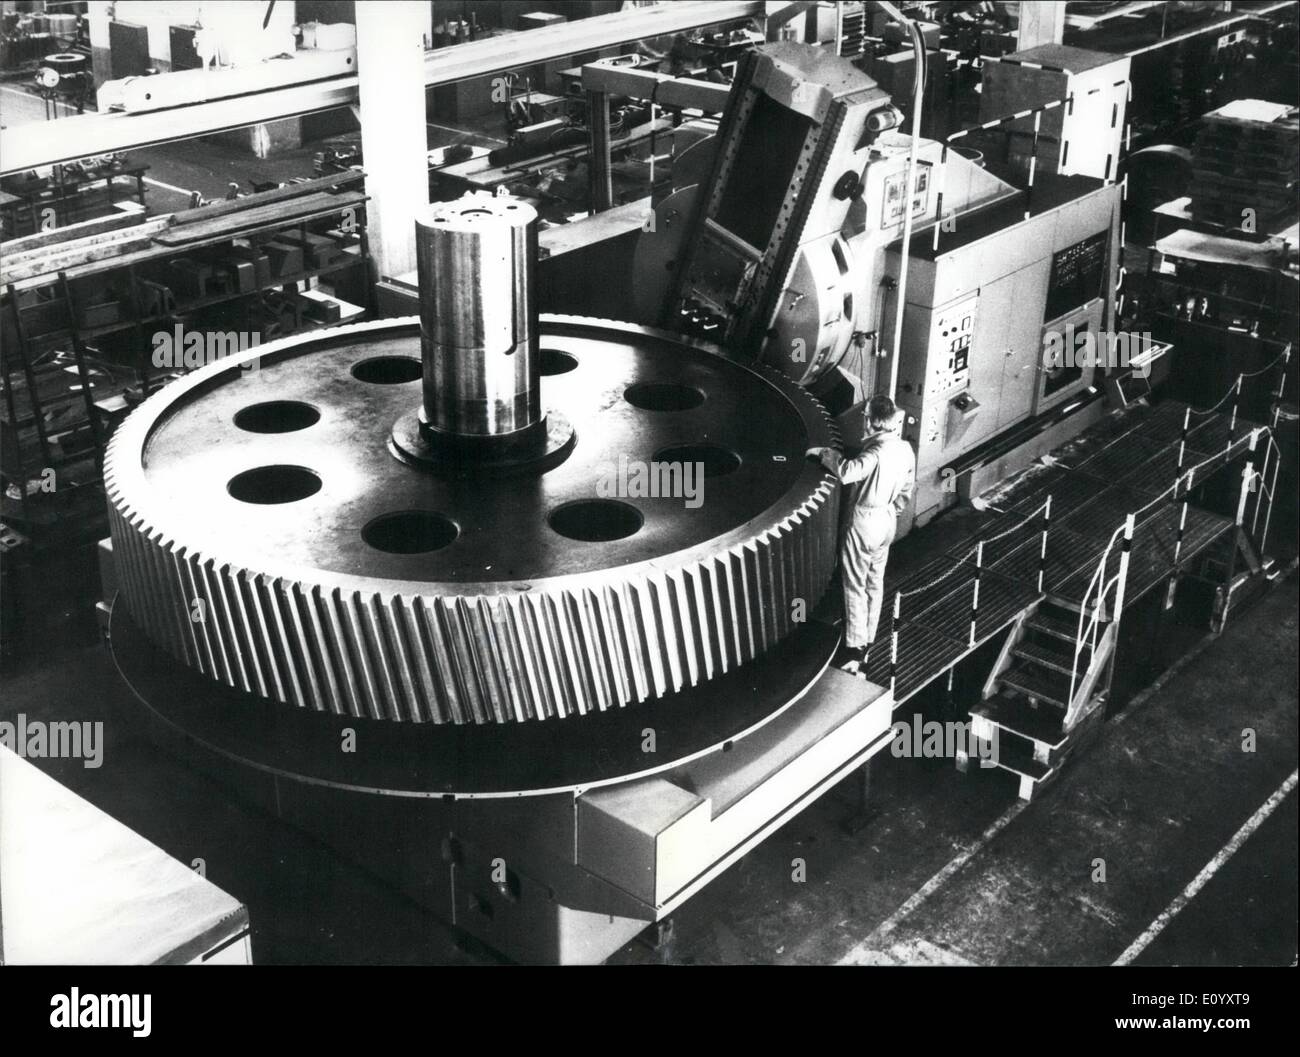 Oct. 10, 1971 - The largest Machine tool ever built in Switzerland.: Tho Mag-Cog-Wheel Ltd Zurich presented this largest machine tool over constructed in Switzerland. The cogwheel cutter ''Maag 600/735 E'' is destinated for the export to a big enterprise in Pittsburg, USA. Its weight is of 115 tons, it is 6 meter high and 12 meters long and can cut cog-wheel up to a diameter of 7,35 meters and up to a weight of 50 tons. One single man is enough to operate it! Stock Photo